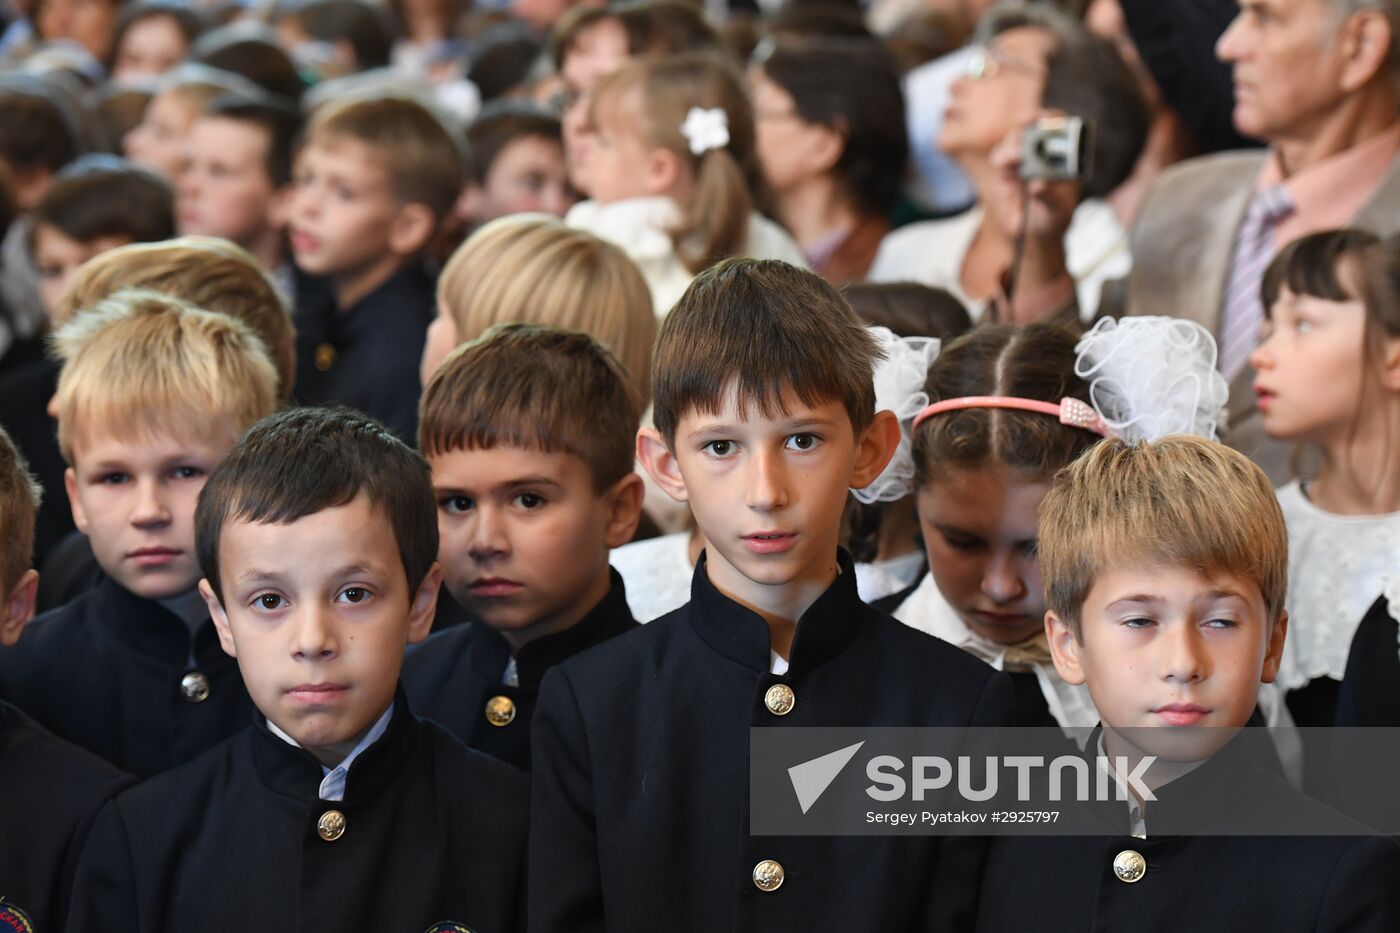 September 1 at Orthodox St.Peter school in Moscow